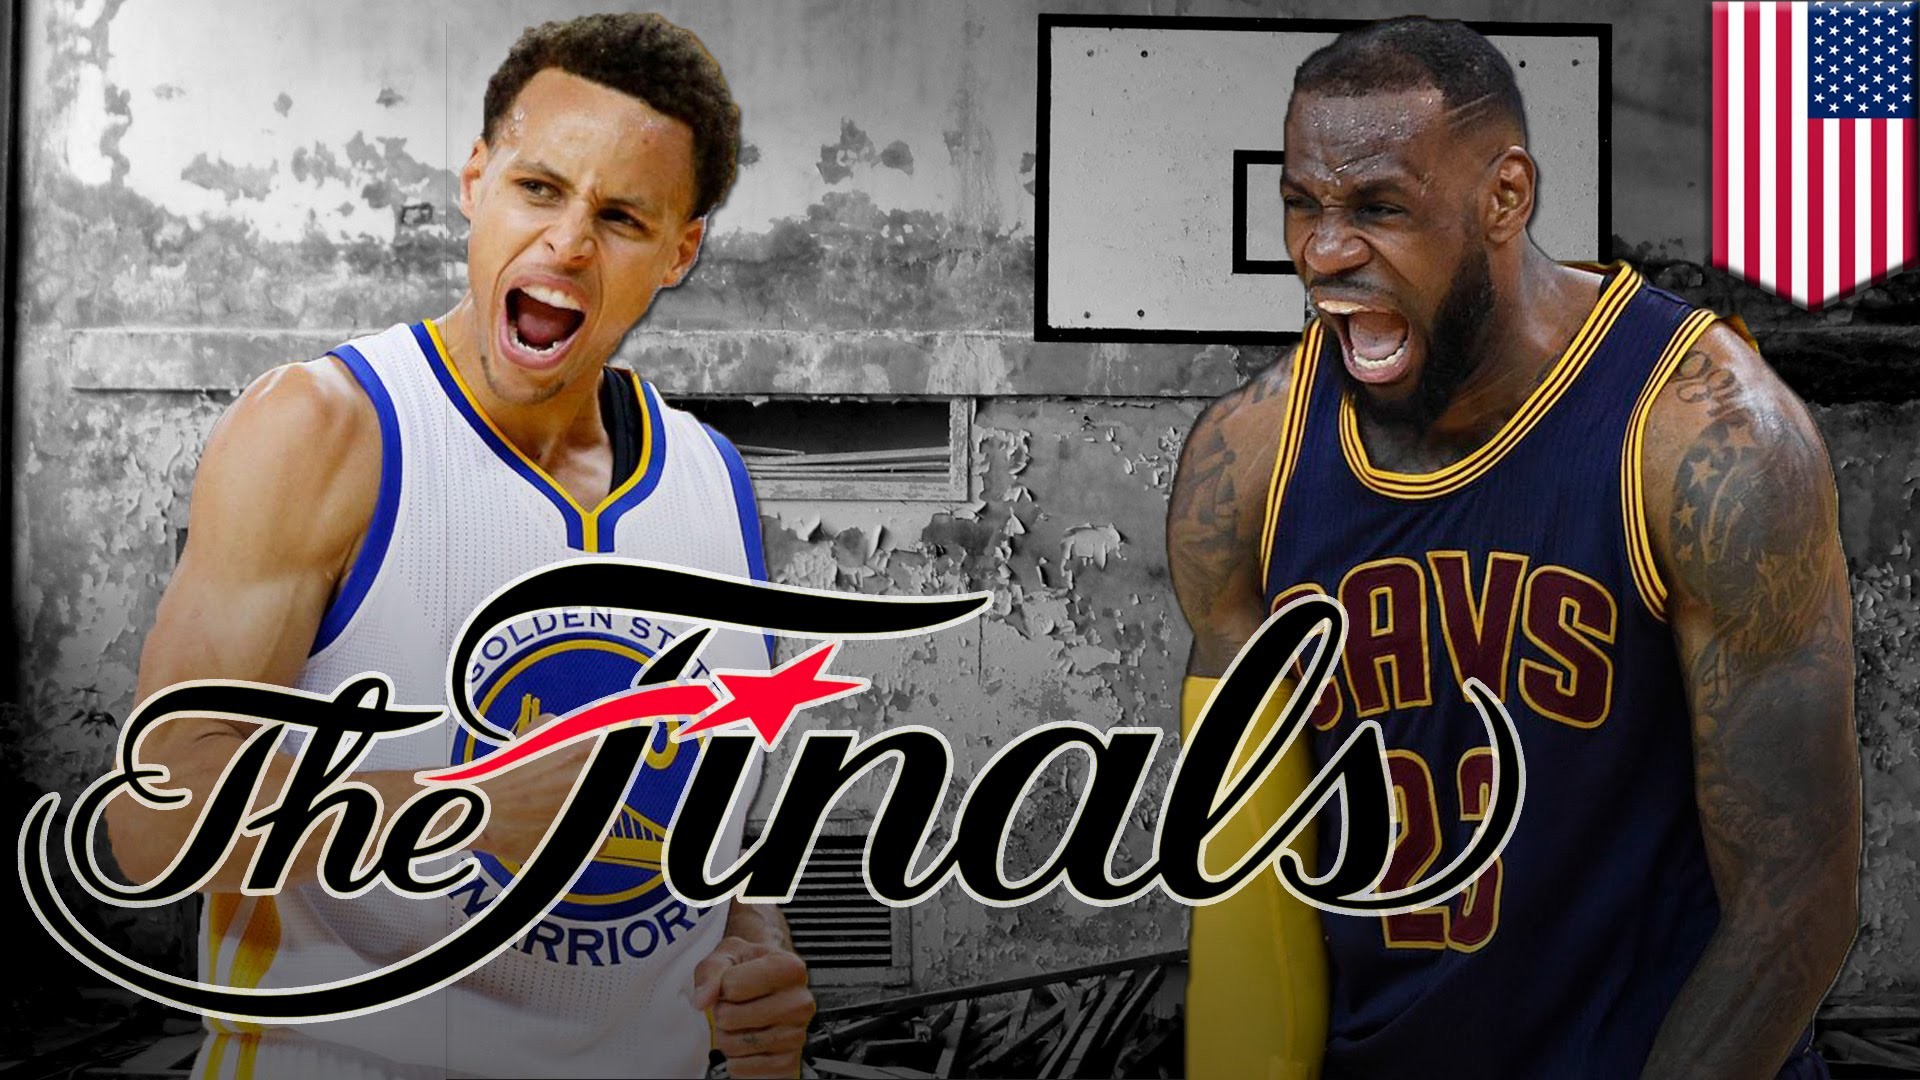 1920x1080 Warriors win 2015 NBA Finals: Curry has strength in numbers, outlasts King  James - YouTube